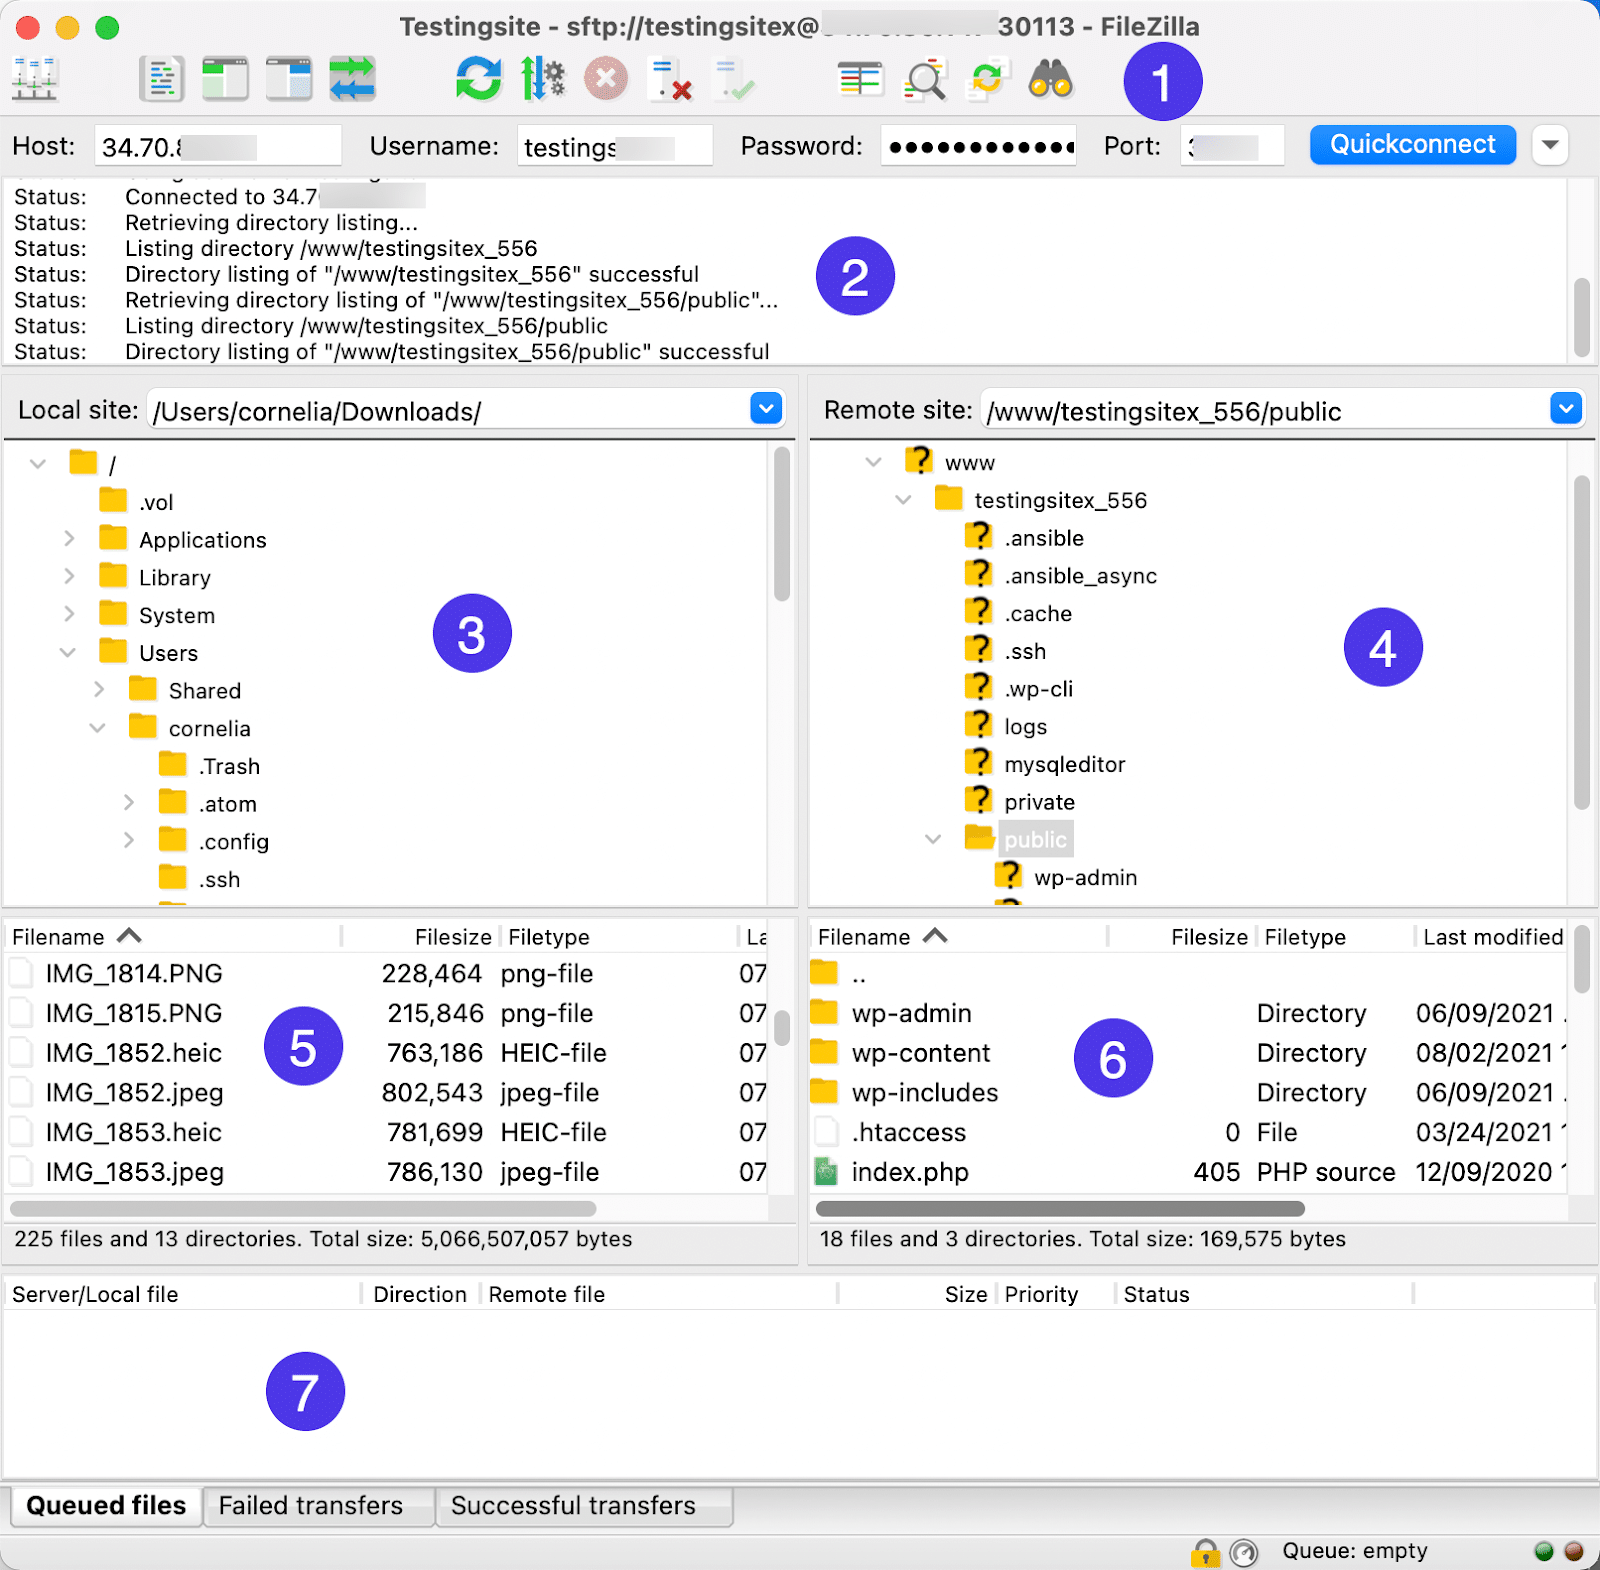 A full view of FileZilla and its many functions.